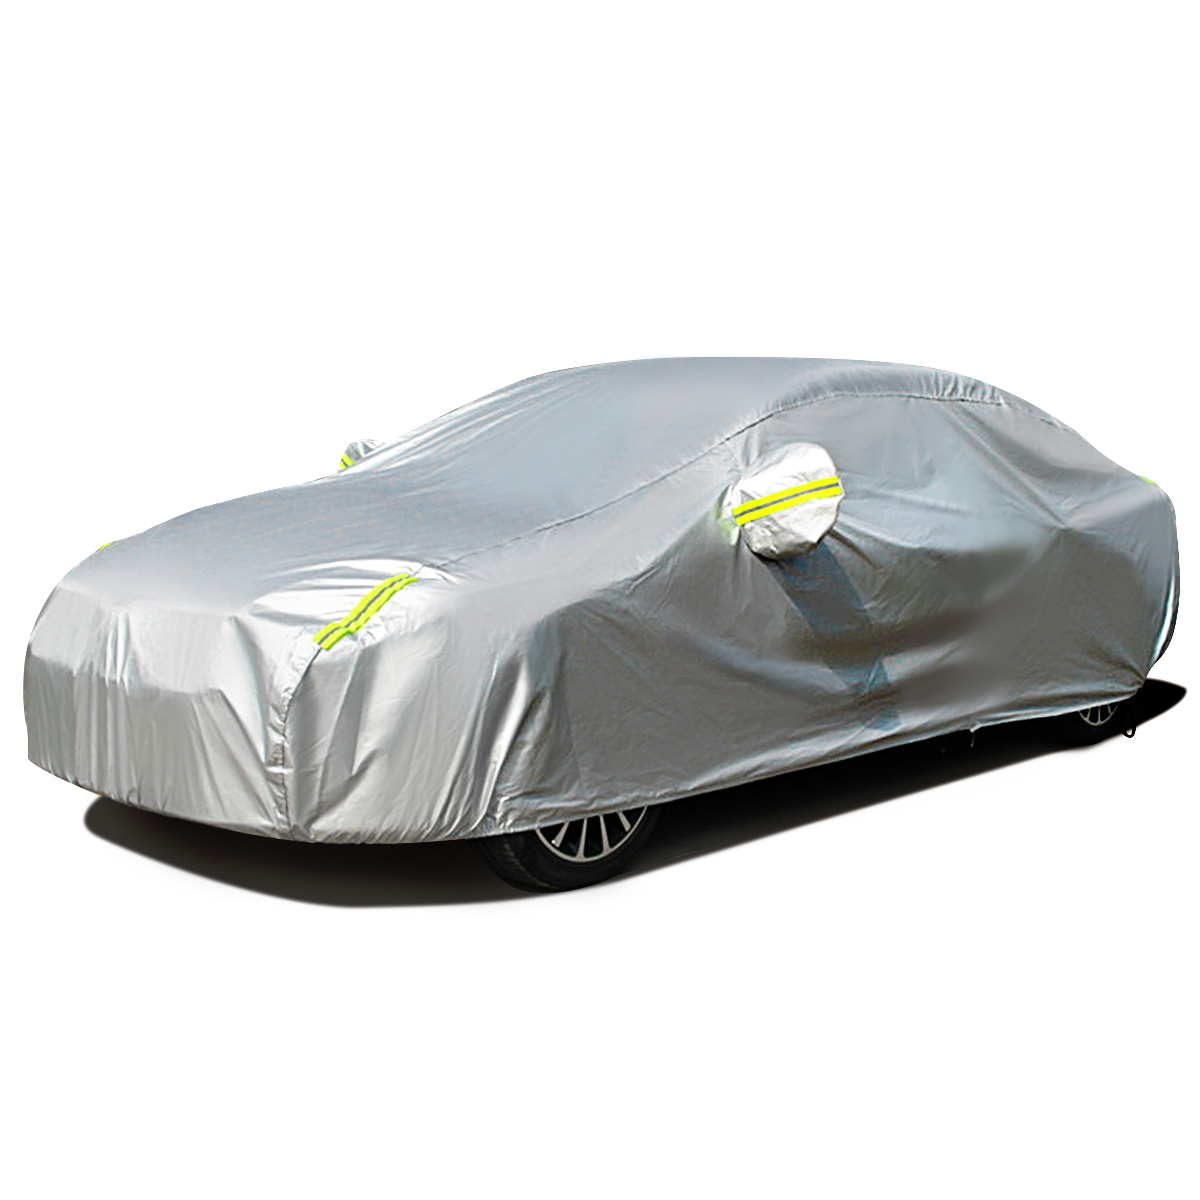 MATCC Car Cover Waterproof Auto Cover All Season All Weather Fit Most of Cars (470*180*150Cm)